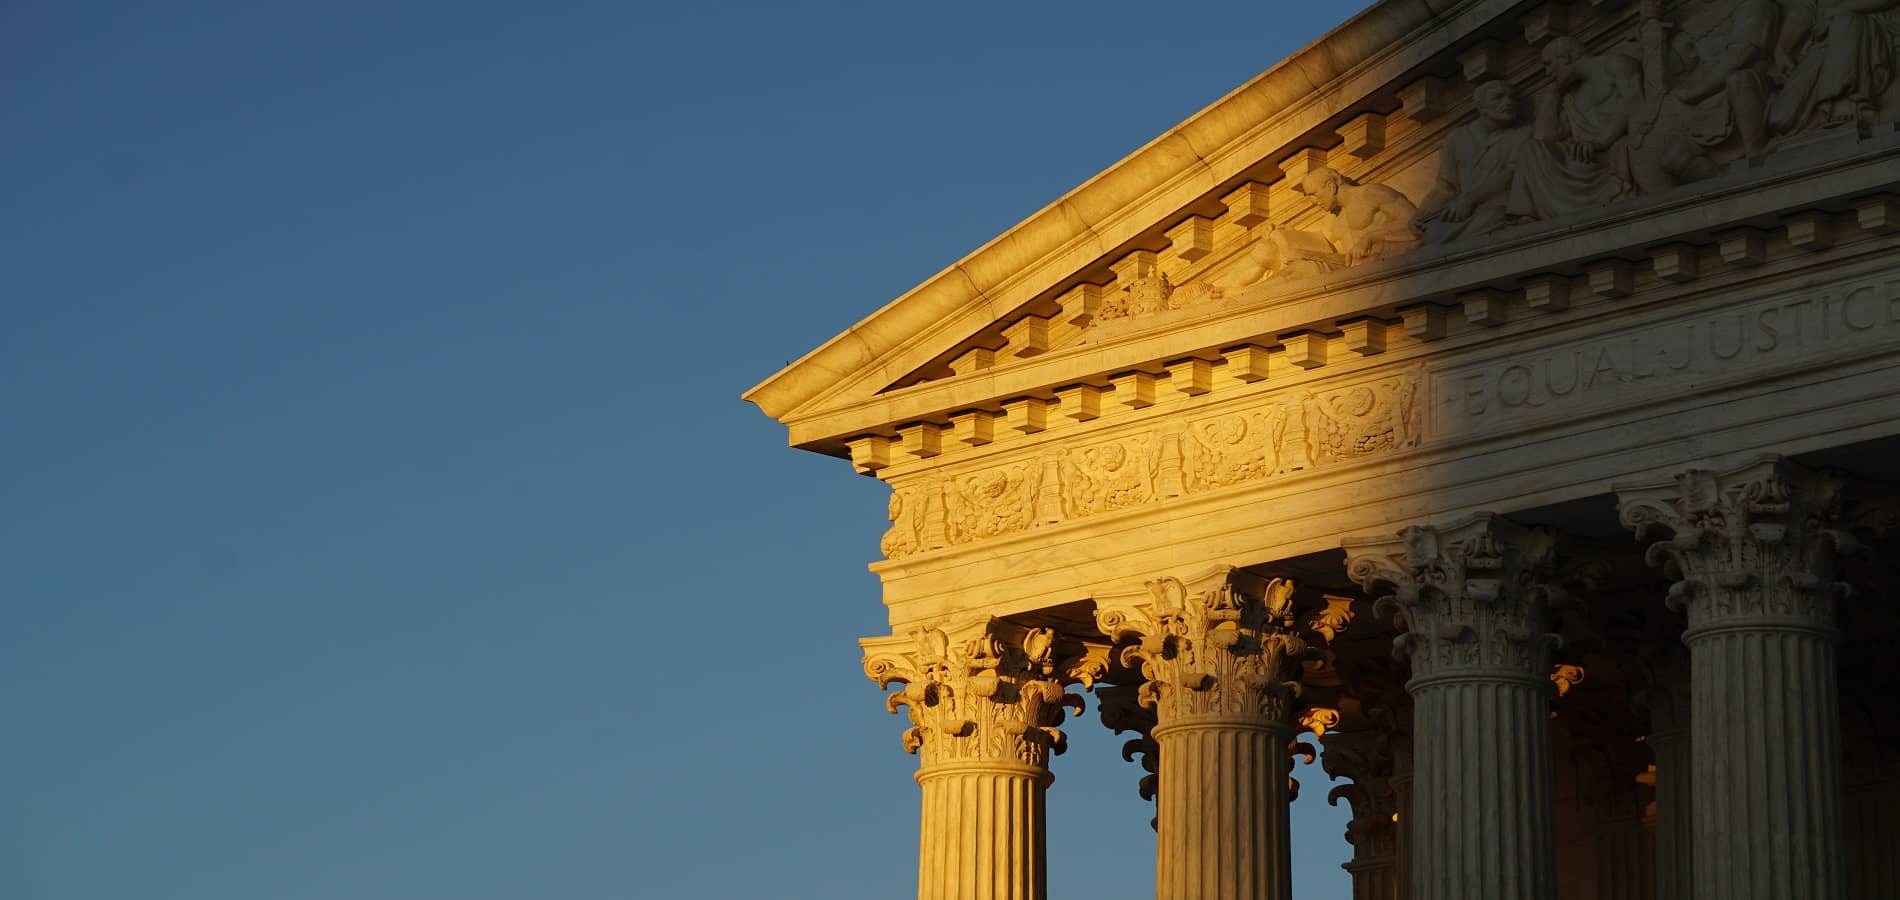 Close up image of the corner of the supreme court building